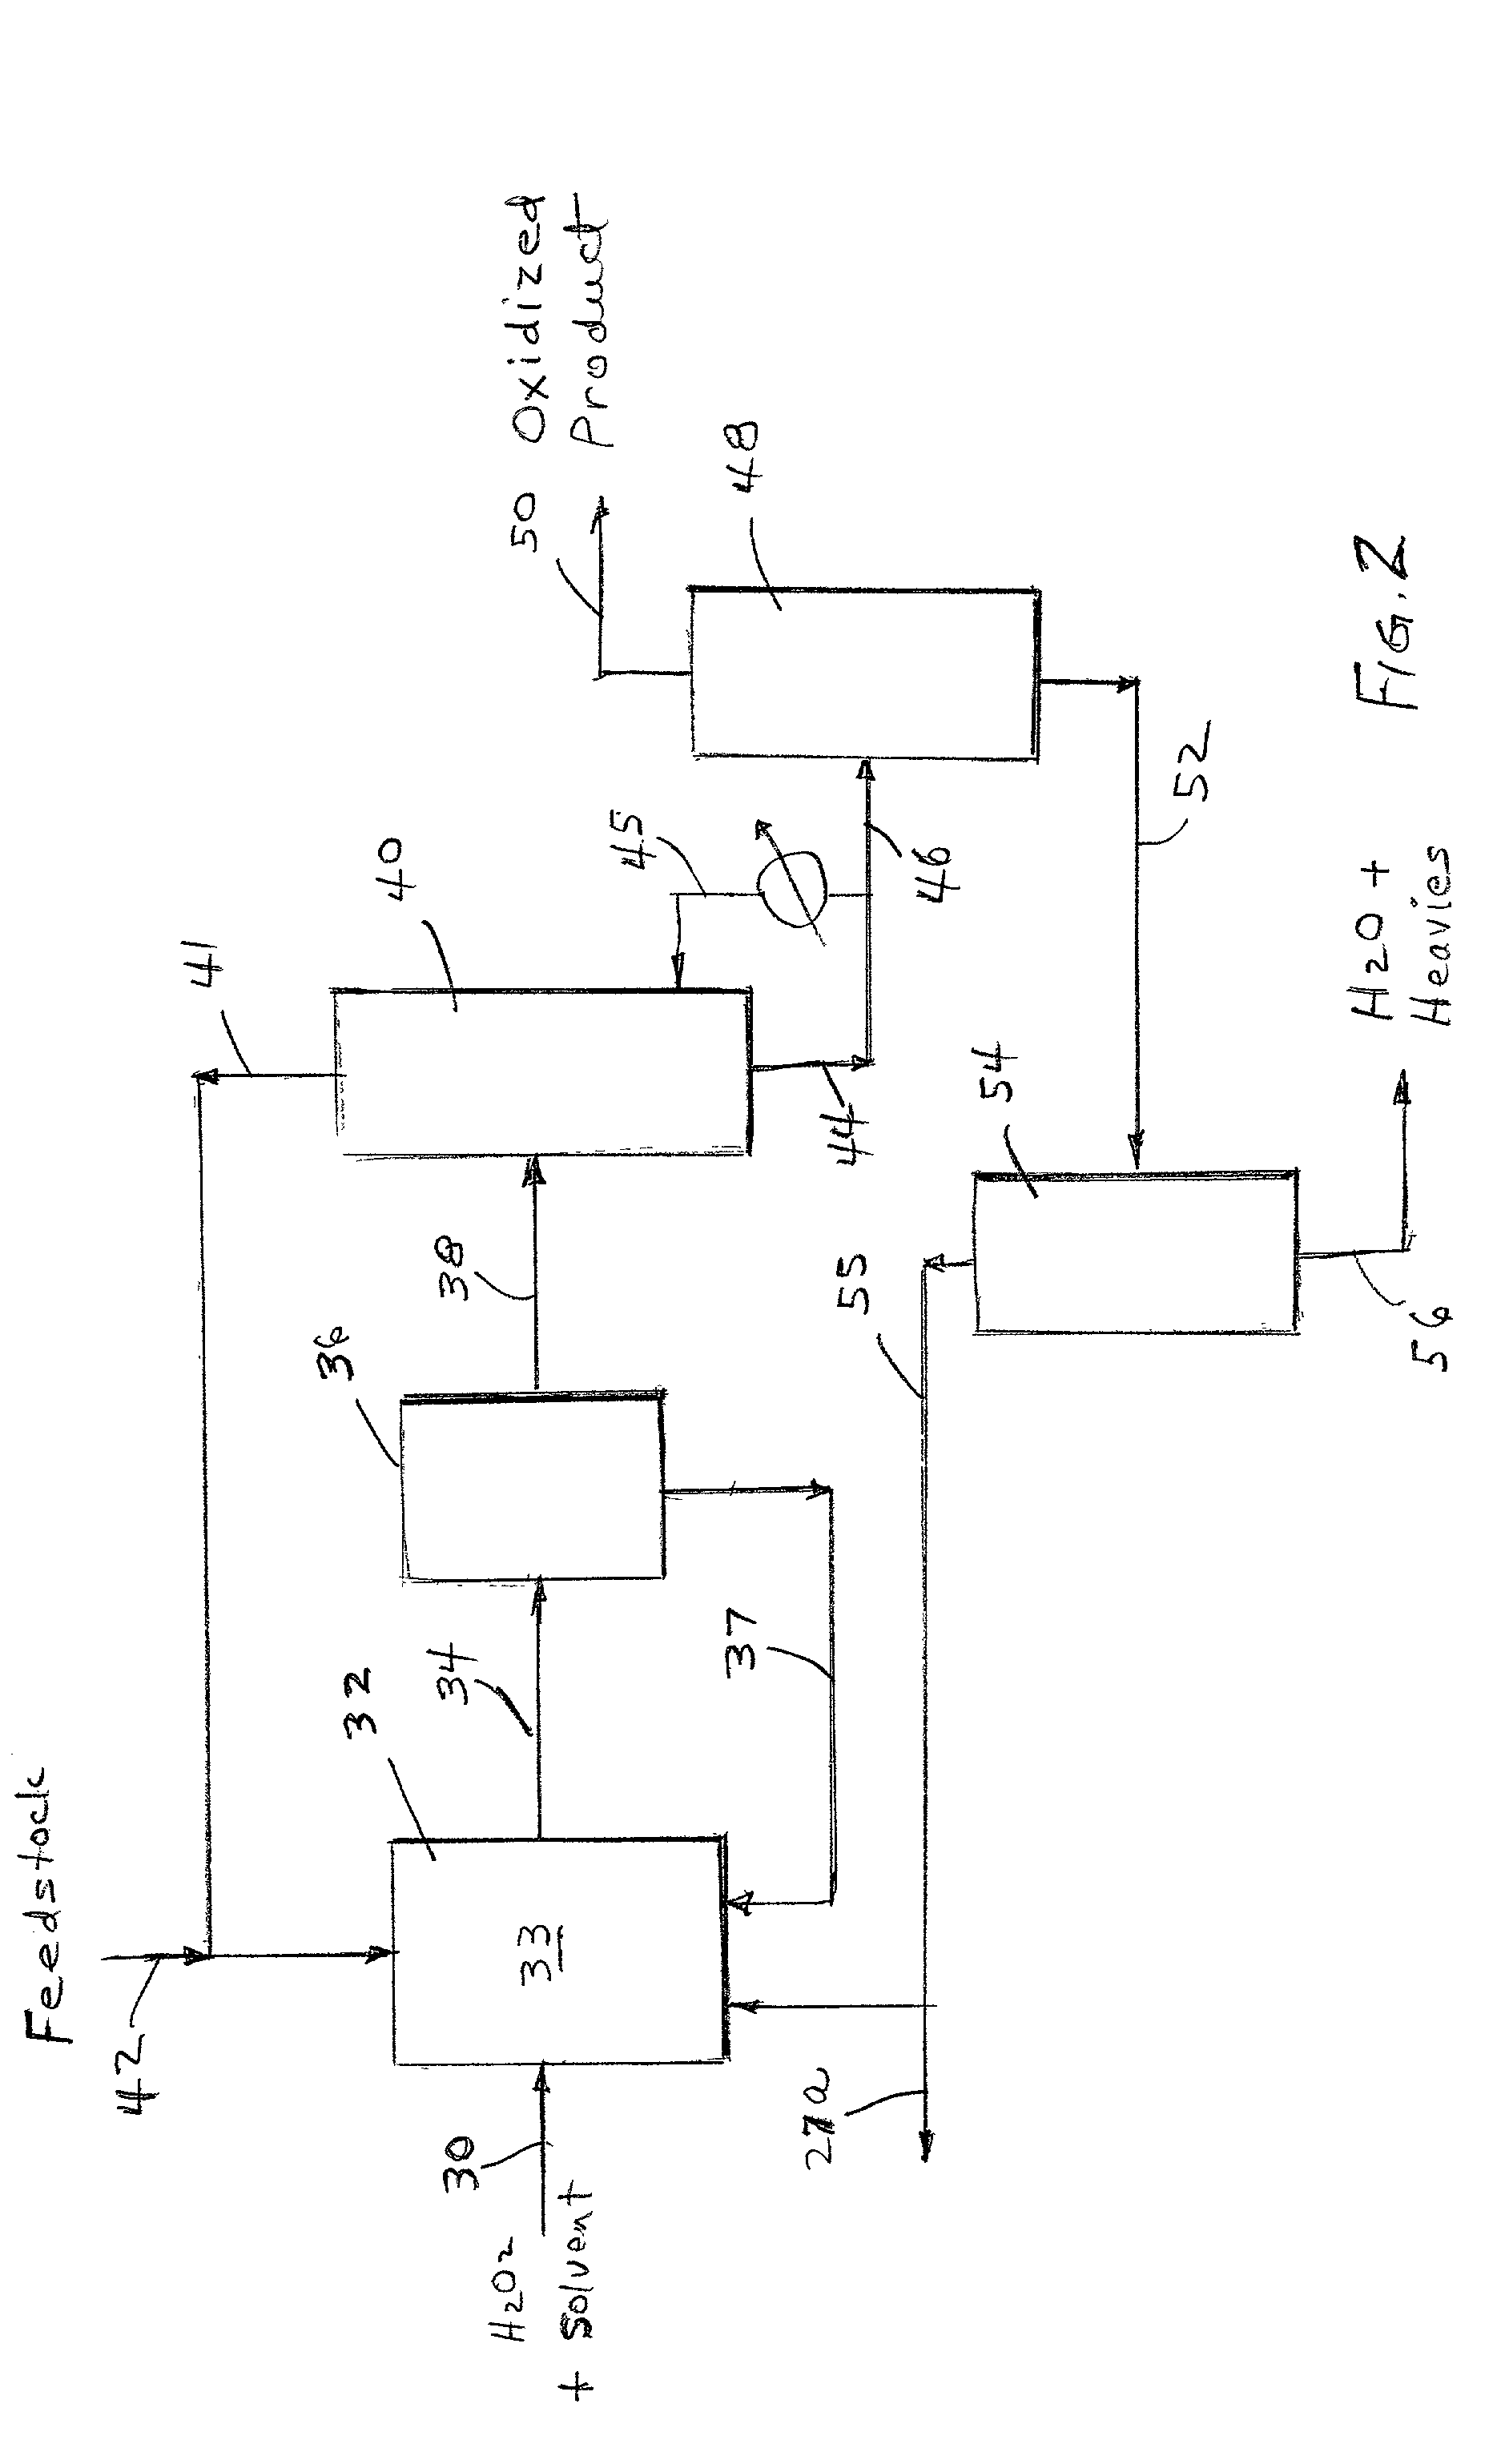 Process for selective oxidation of organic feedstocks with hydrogen peroxide